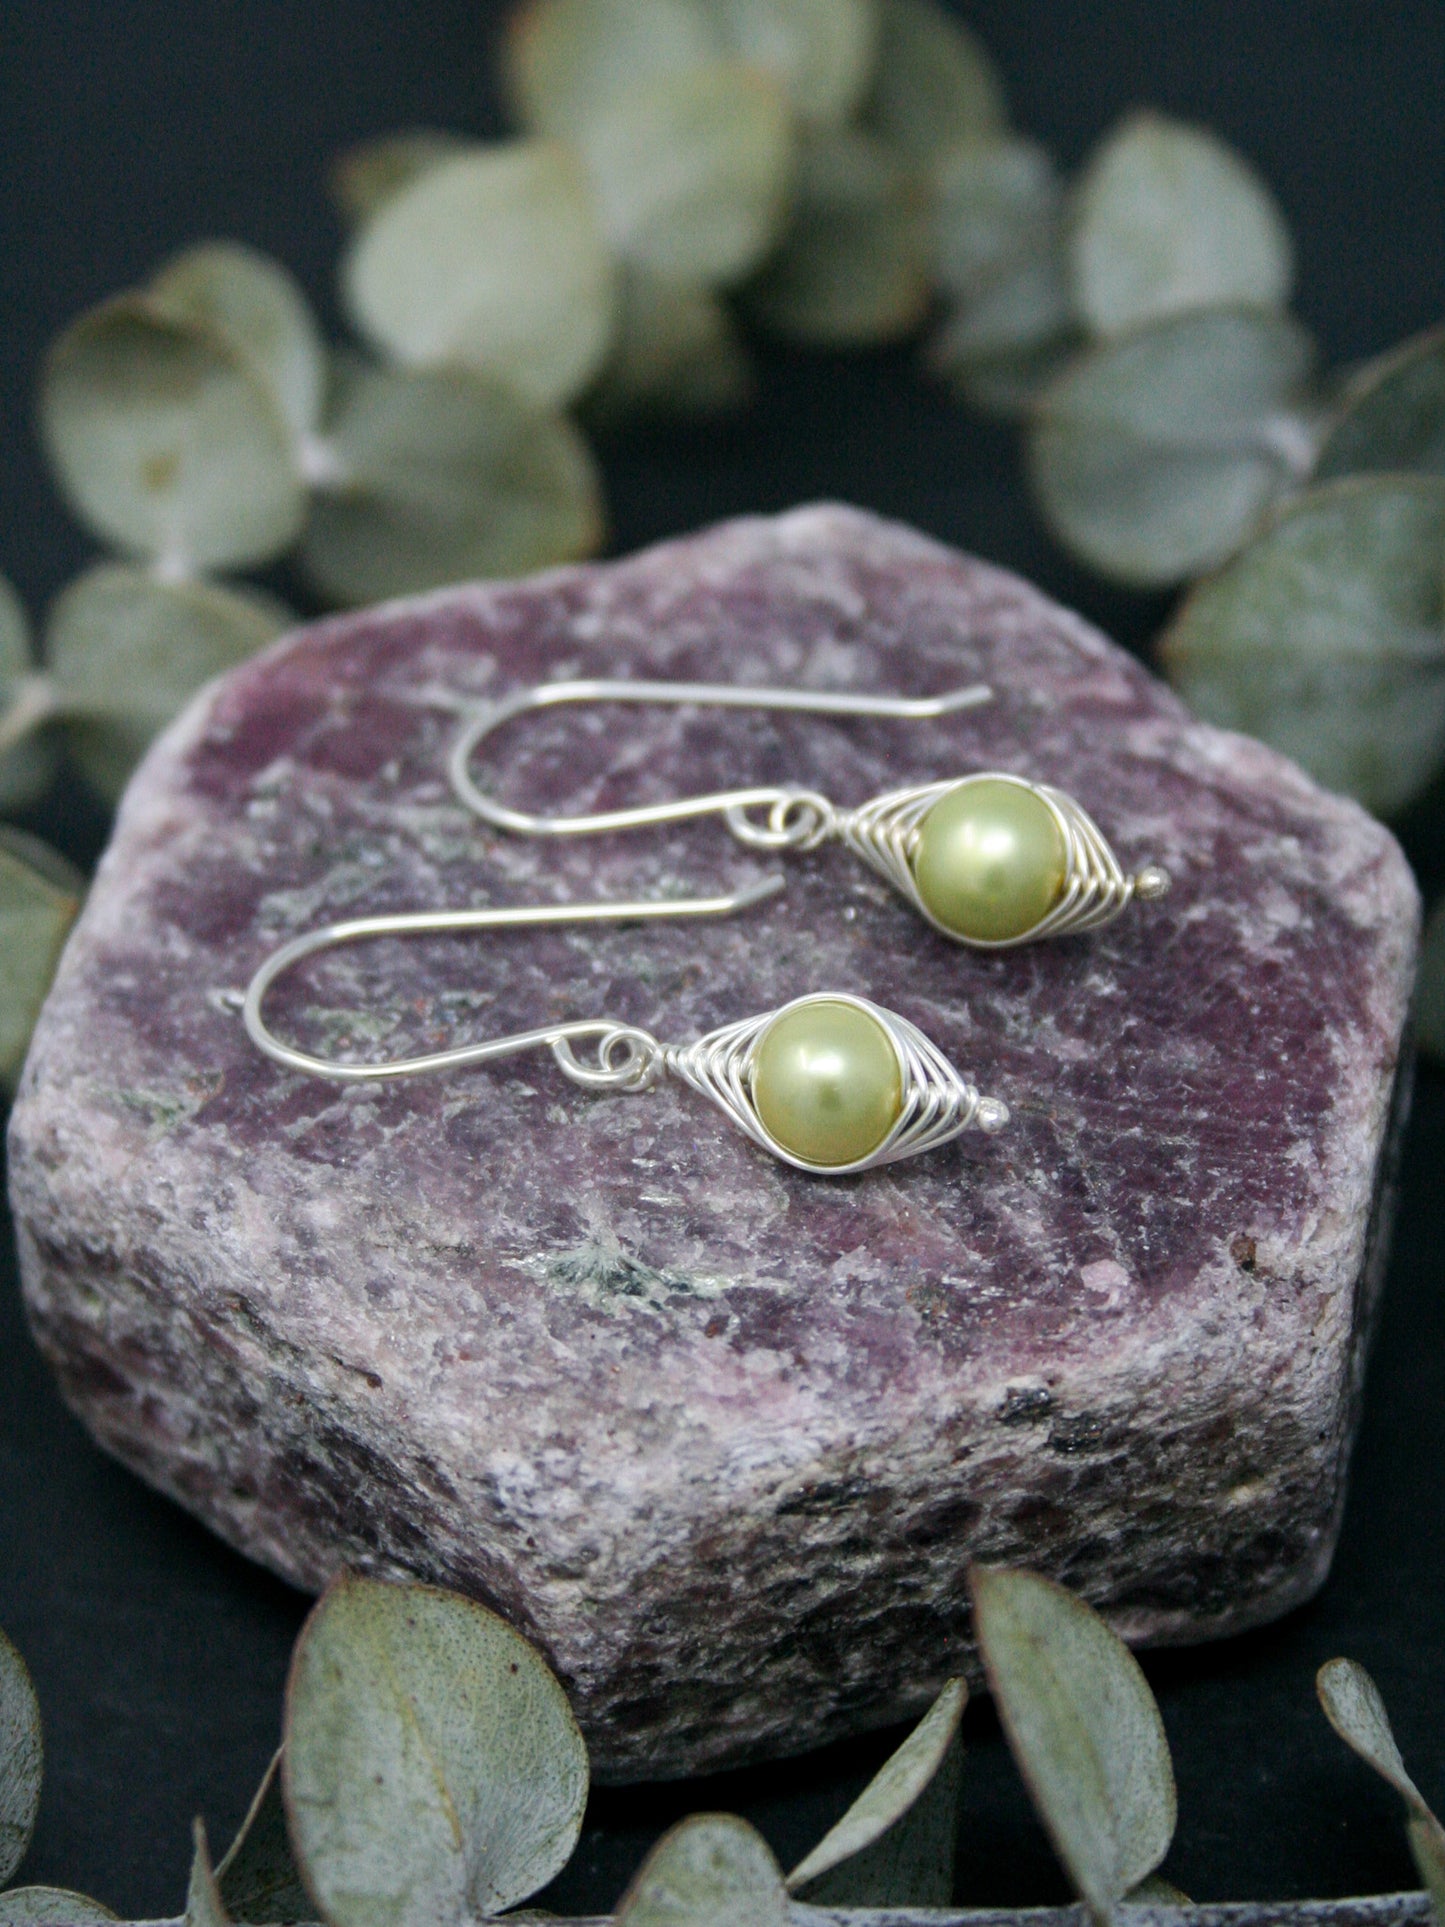 One pea in a pod earrings [made to order]